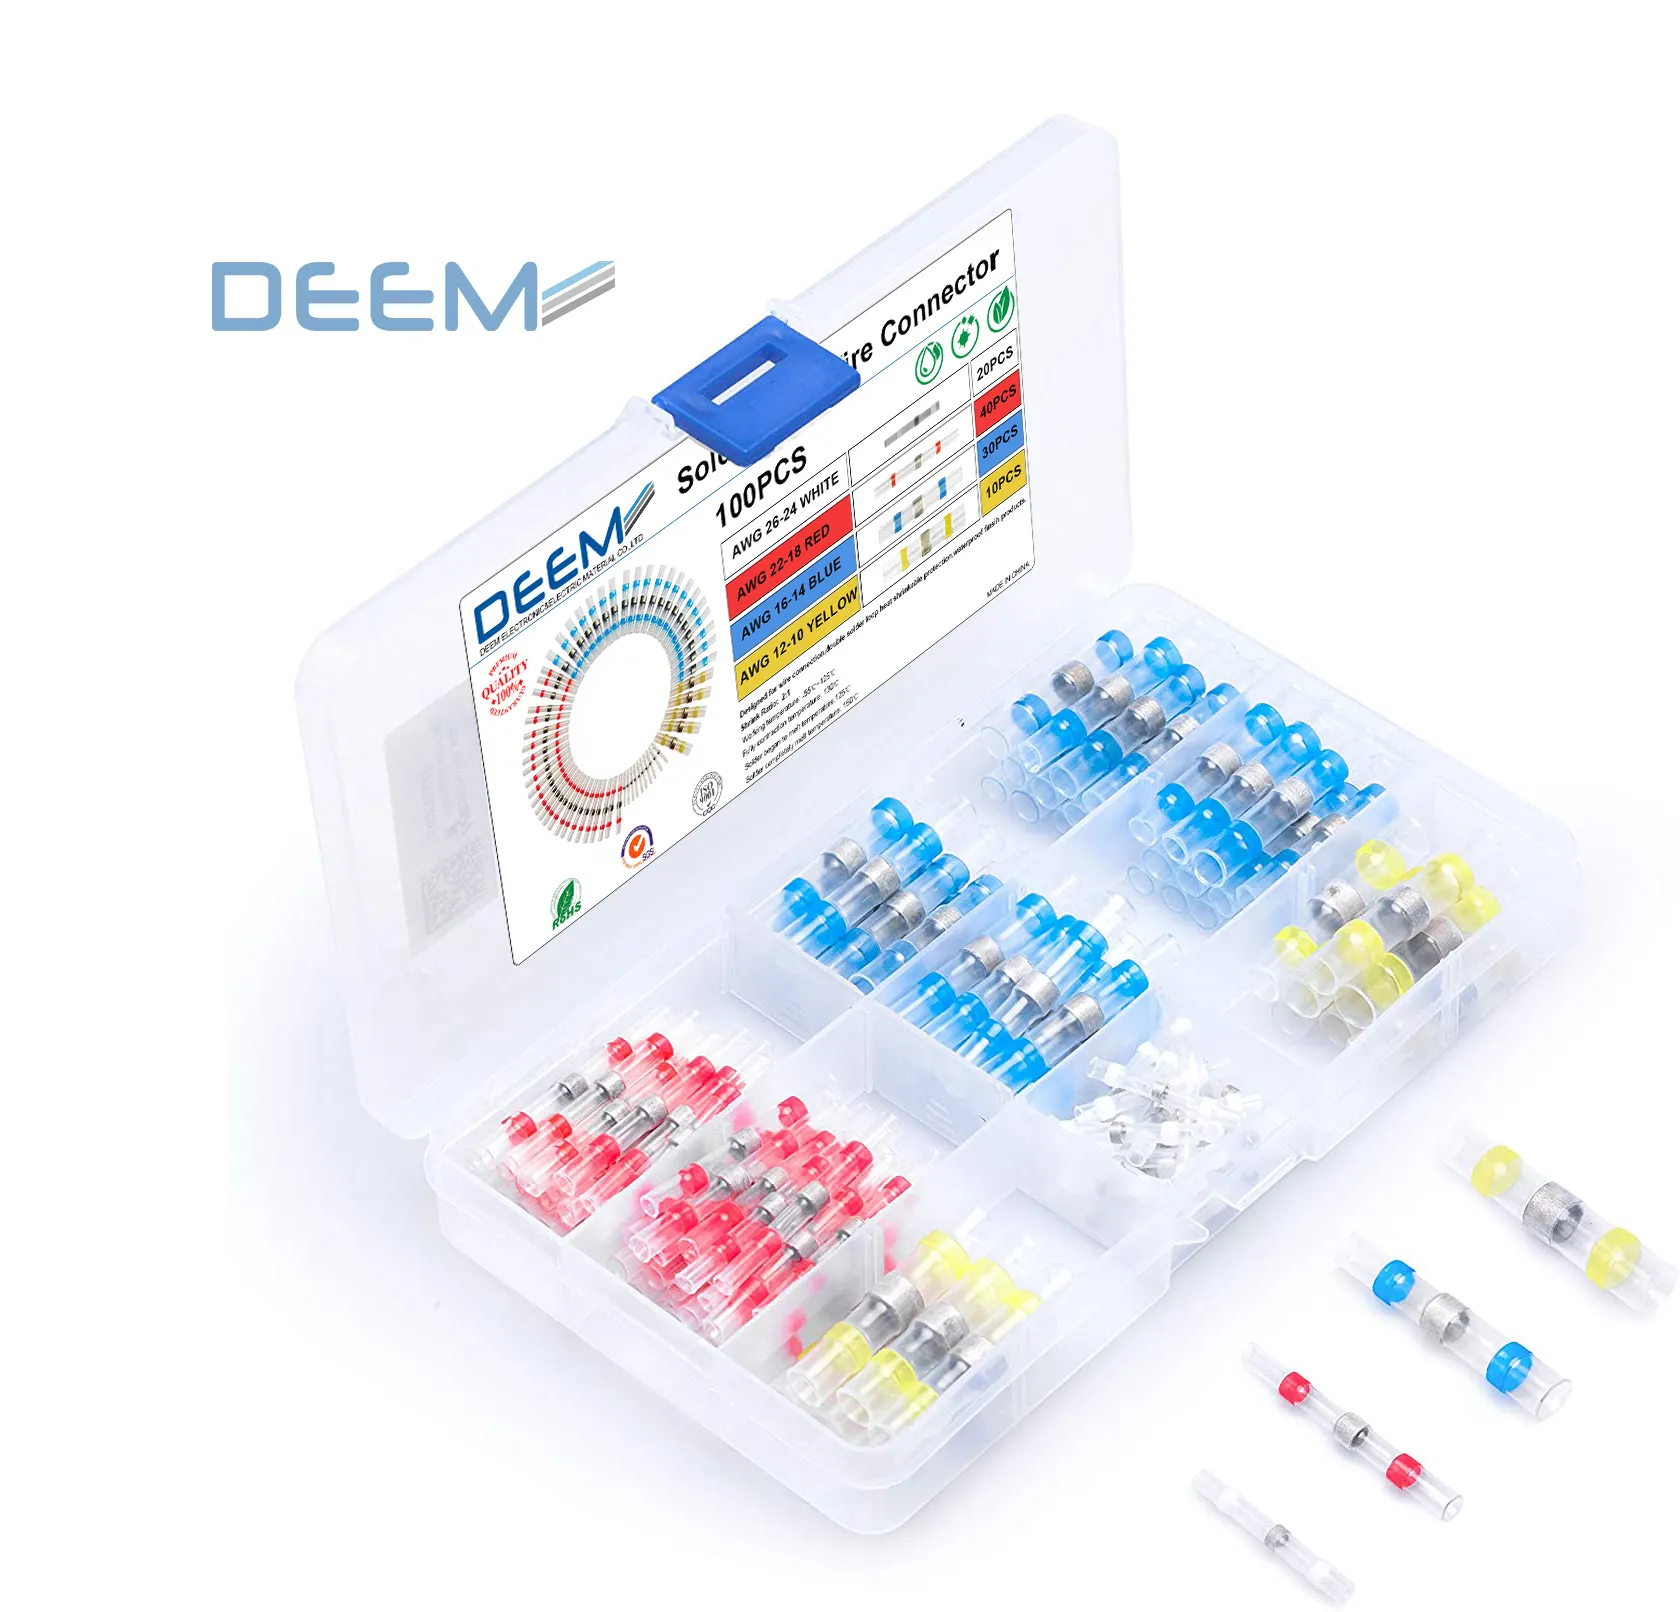 DEEM 100 PCS Waterproof Power Cable Wire Connector Automotive Heat Shrink Wire Connector Kit